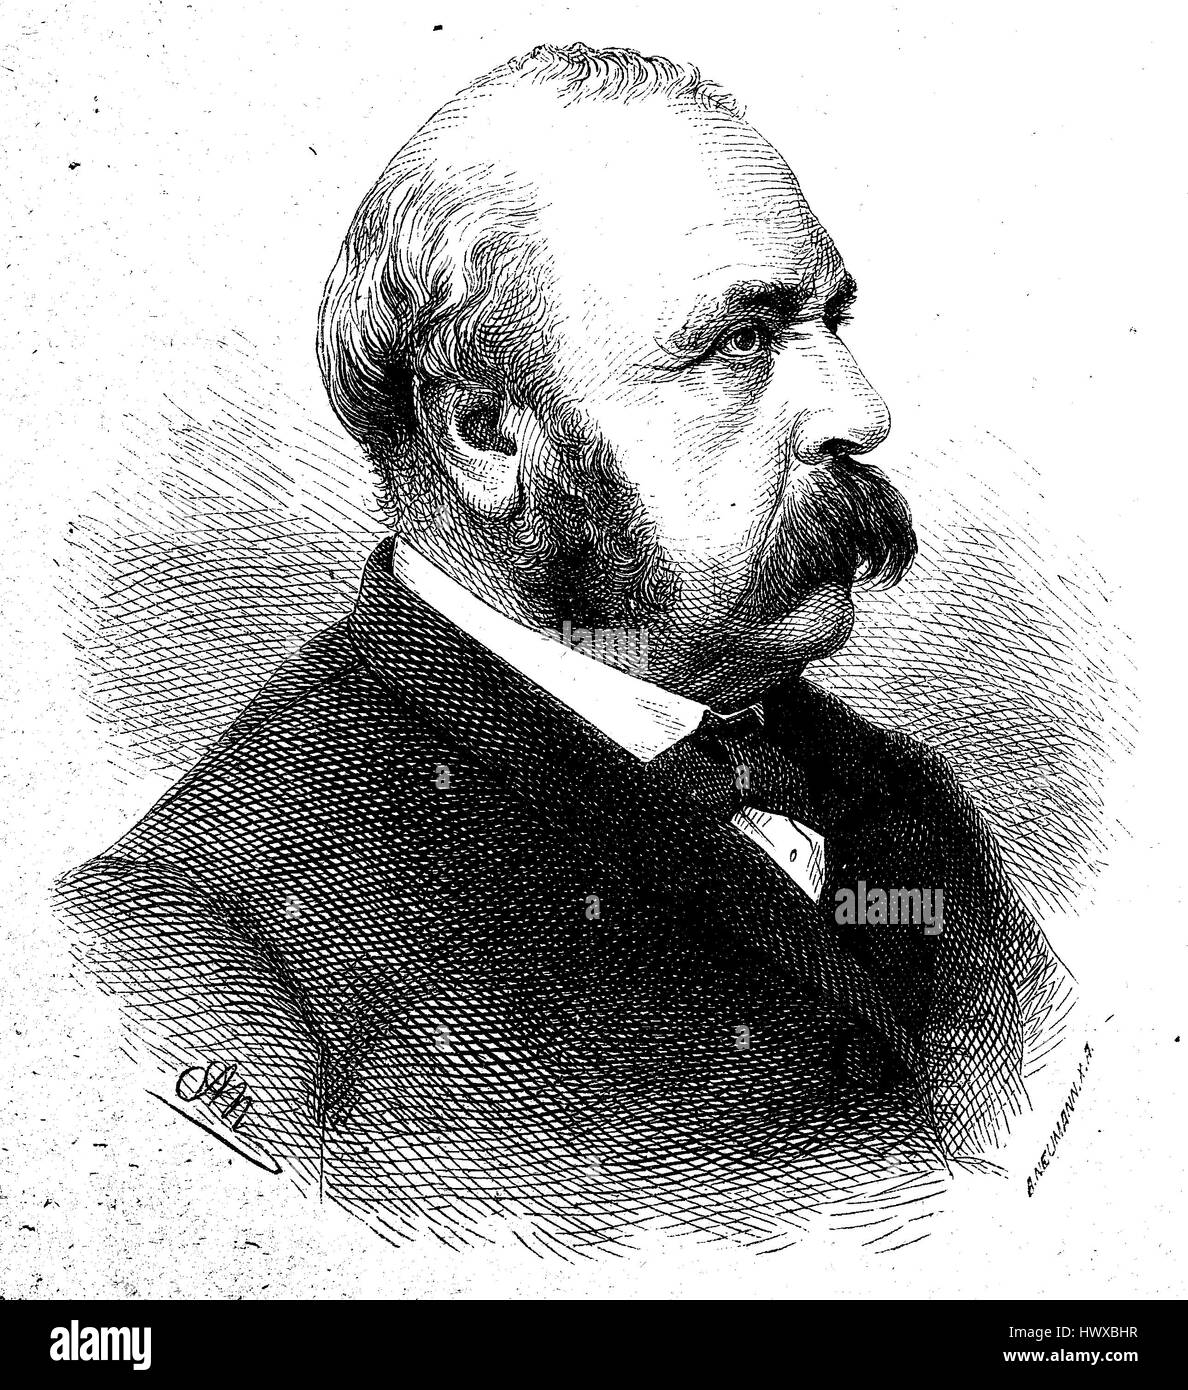 Alexandre Auguste Ledru-Rollin, Paris - 2 February 1807 December 31, 1874 in Fontenay-aux-roses, was a French politician, and held the Office of Minister of the Interior from February 24 until May 11, 1848, France, reproduction of an image, woodcut from the year 1881, digital improved Stock Photo